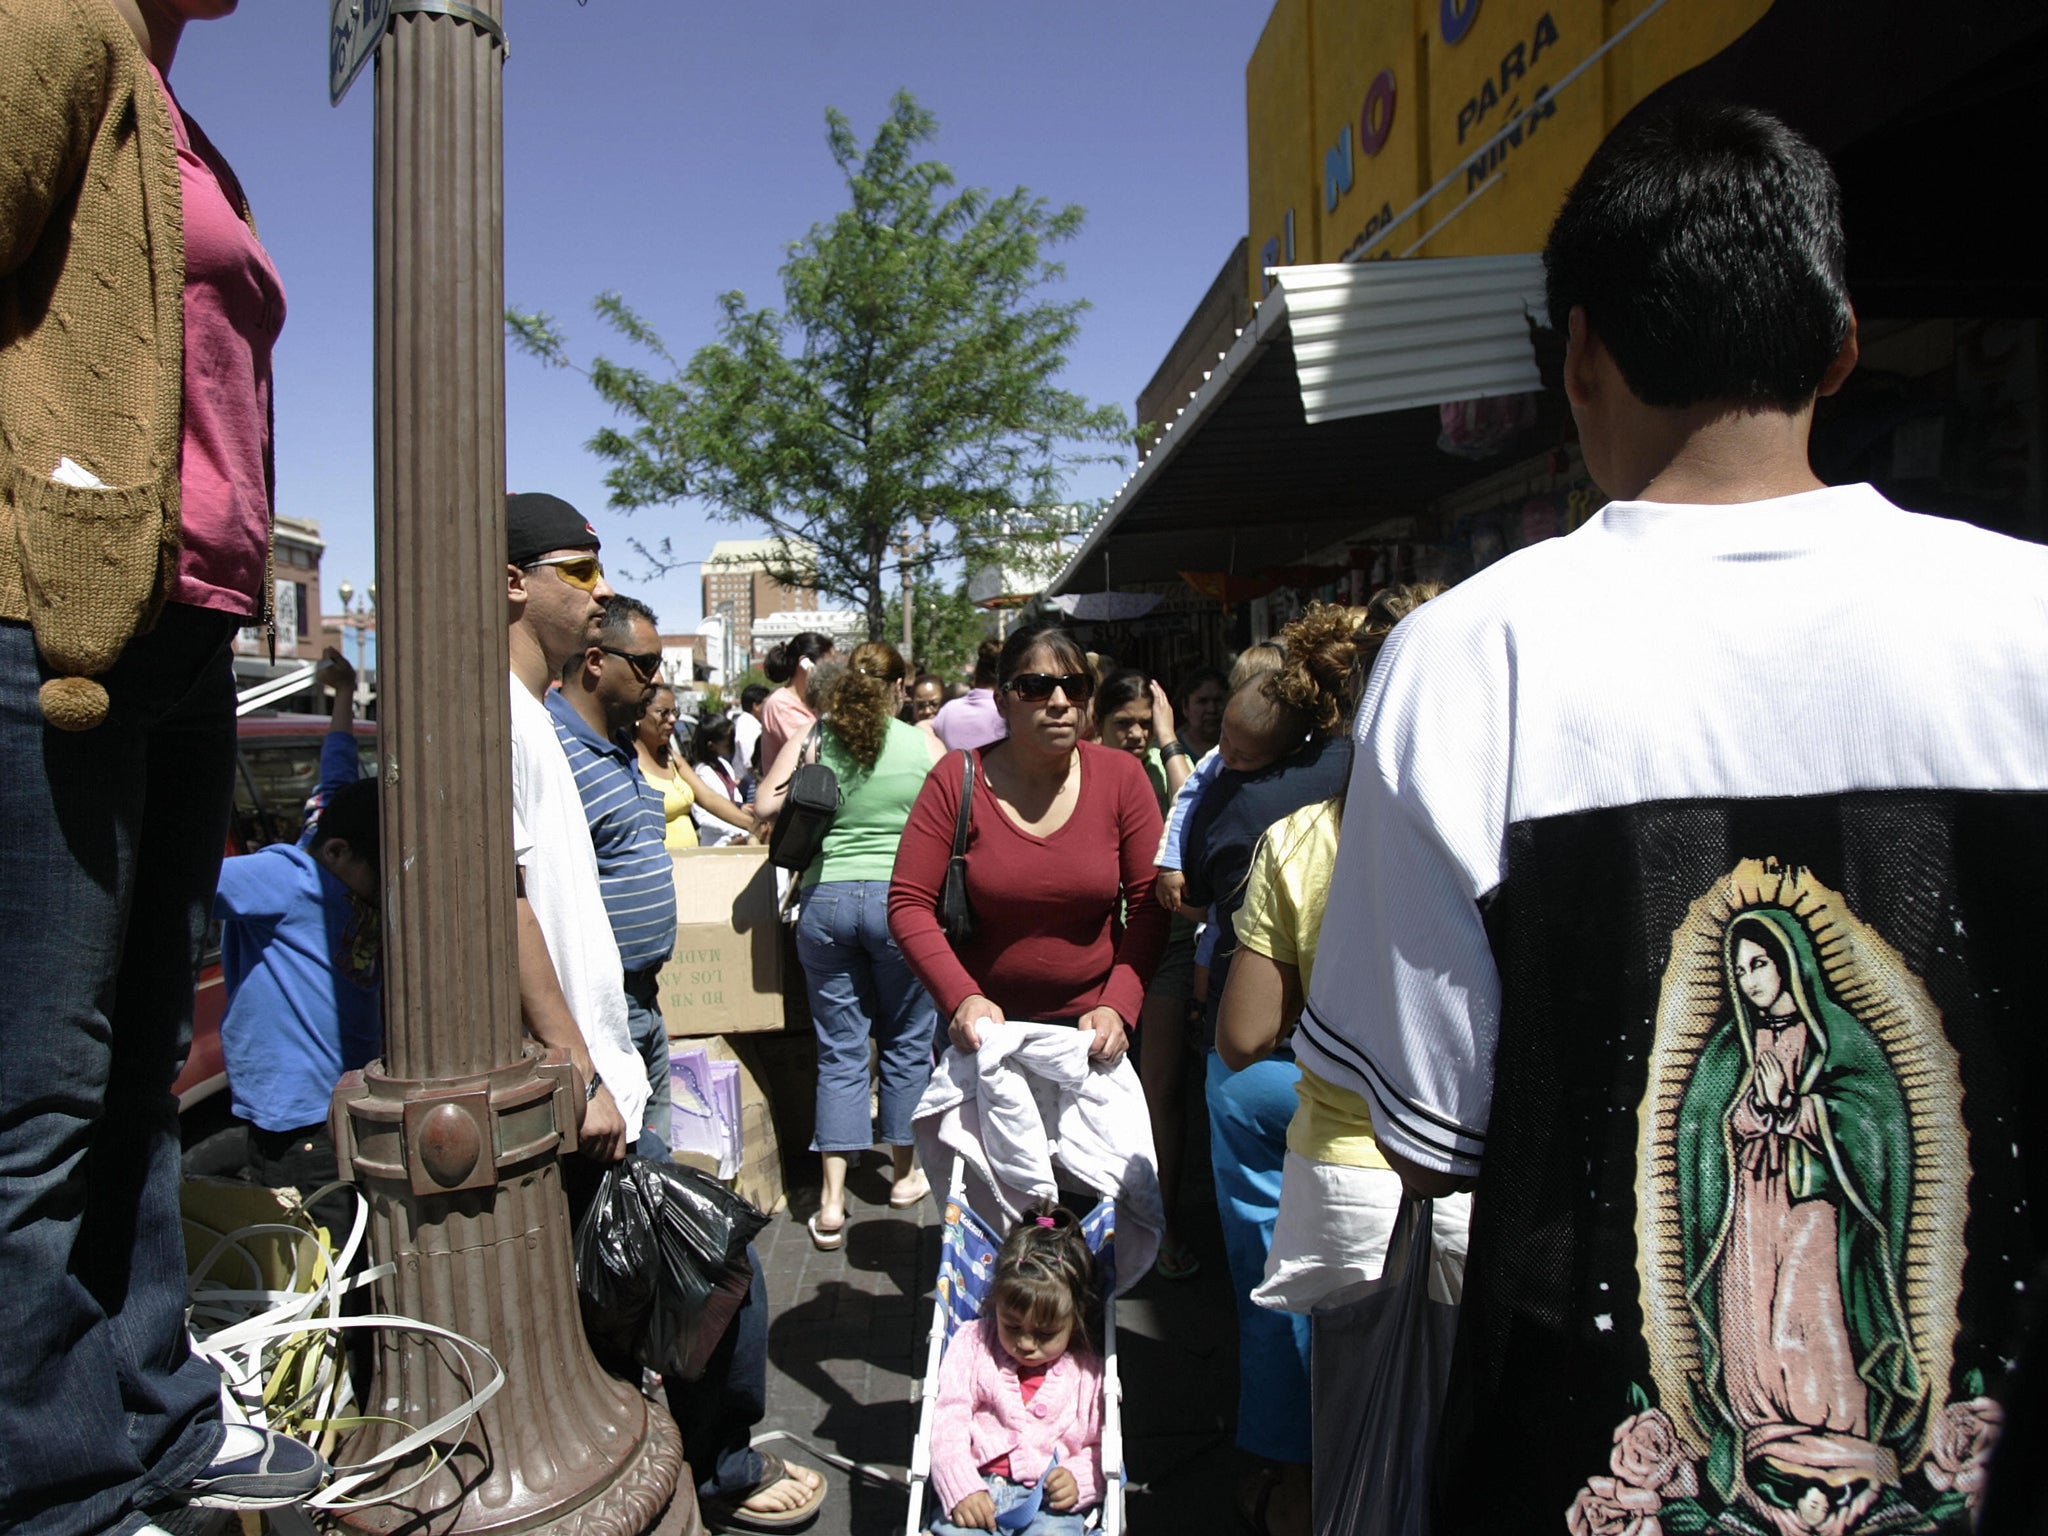 El Paso residents walk through a local market Hector Mata / Getty Images